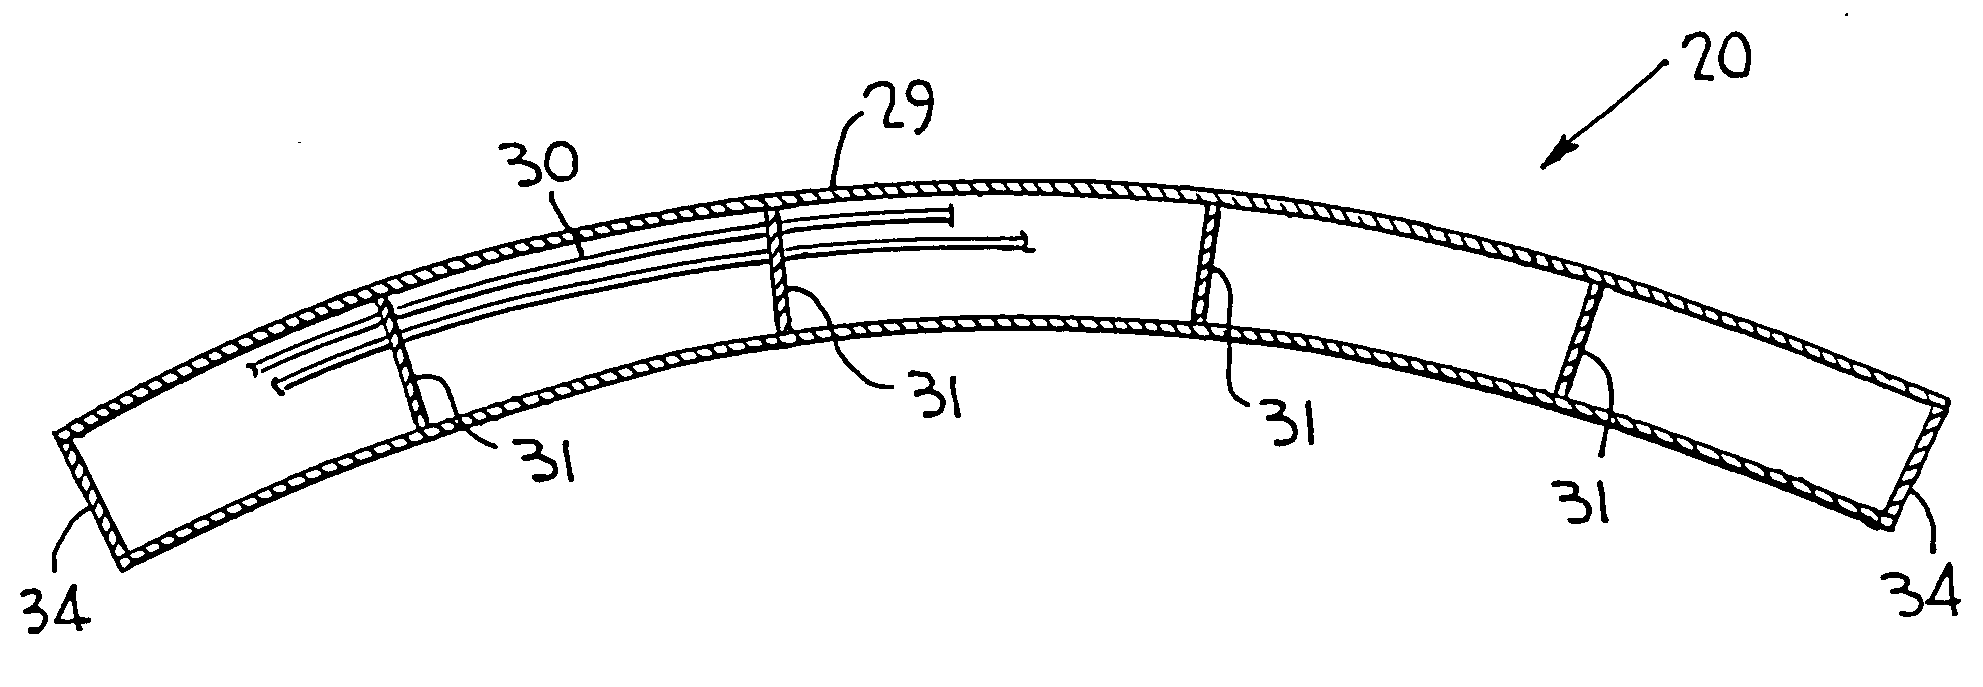 Cable-stay cradle system